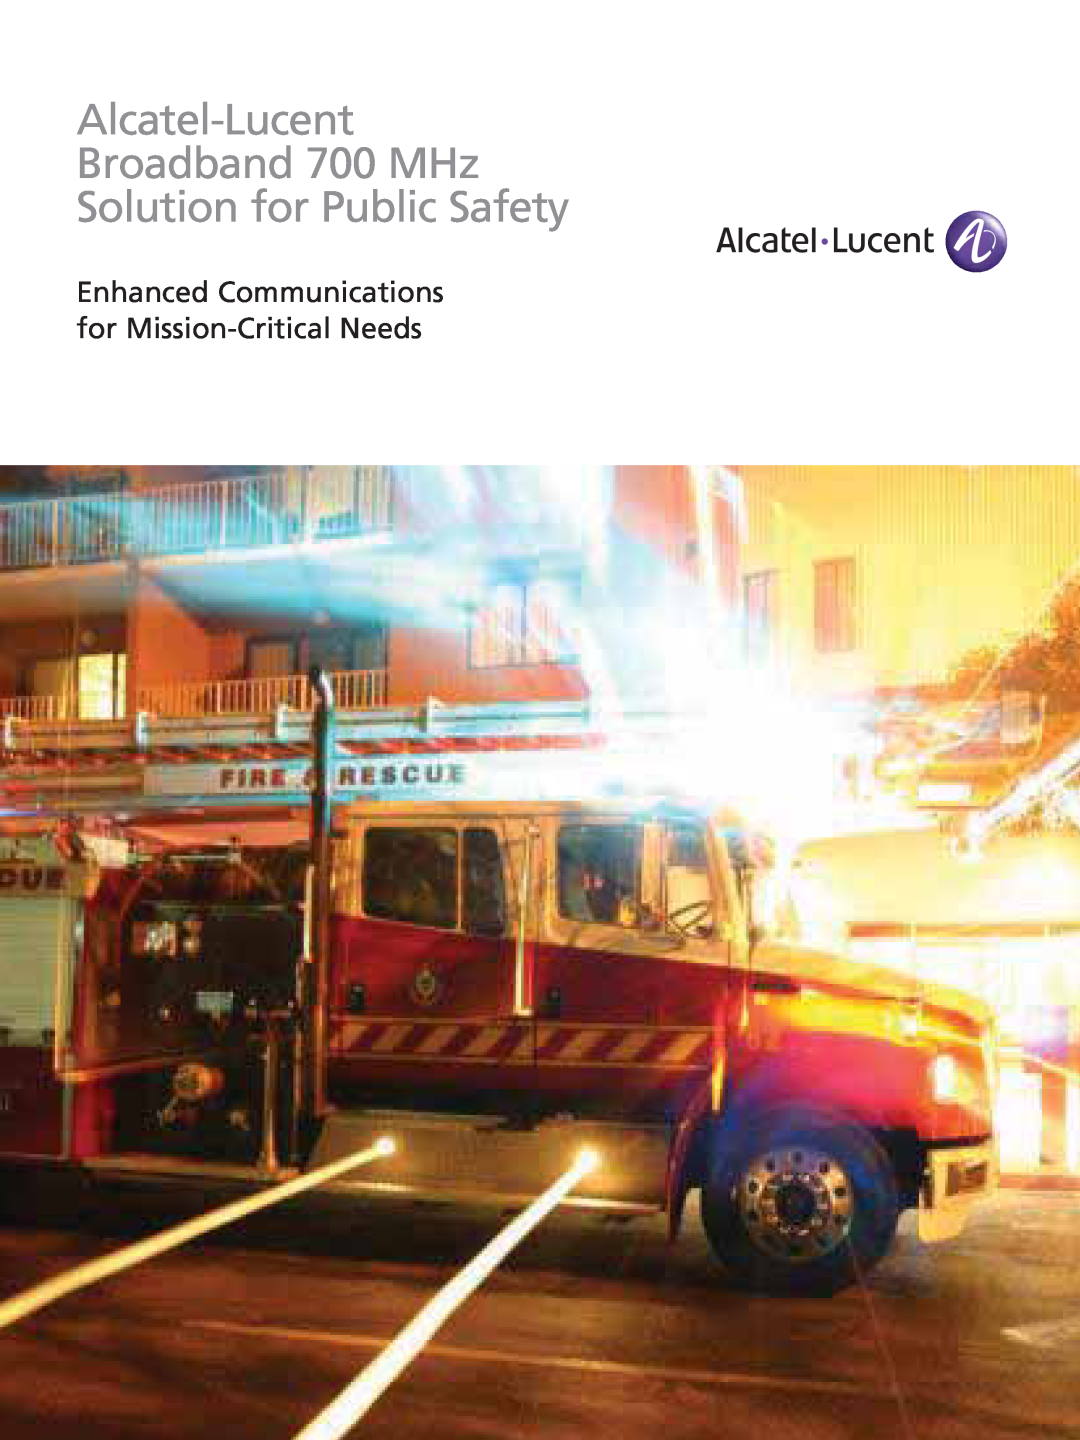 Alcatel-Lucent manual Alcatel-Lucent Broadband 700 MHz Solution for Public Safety 